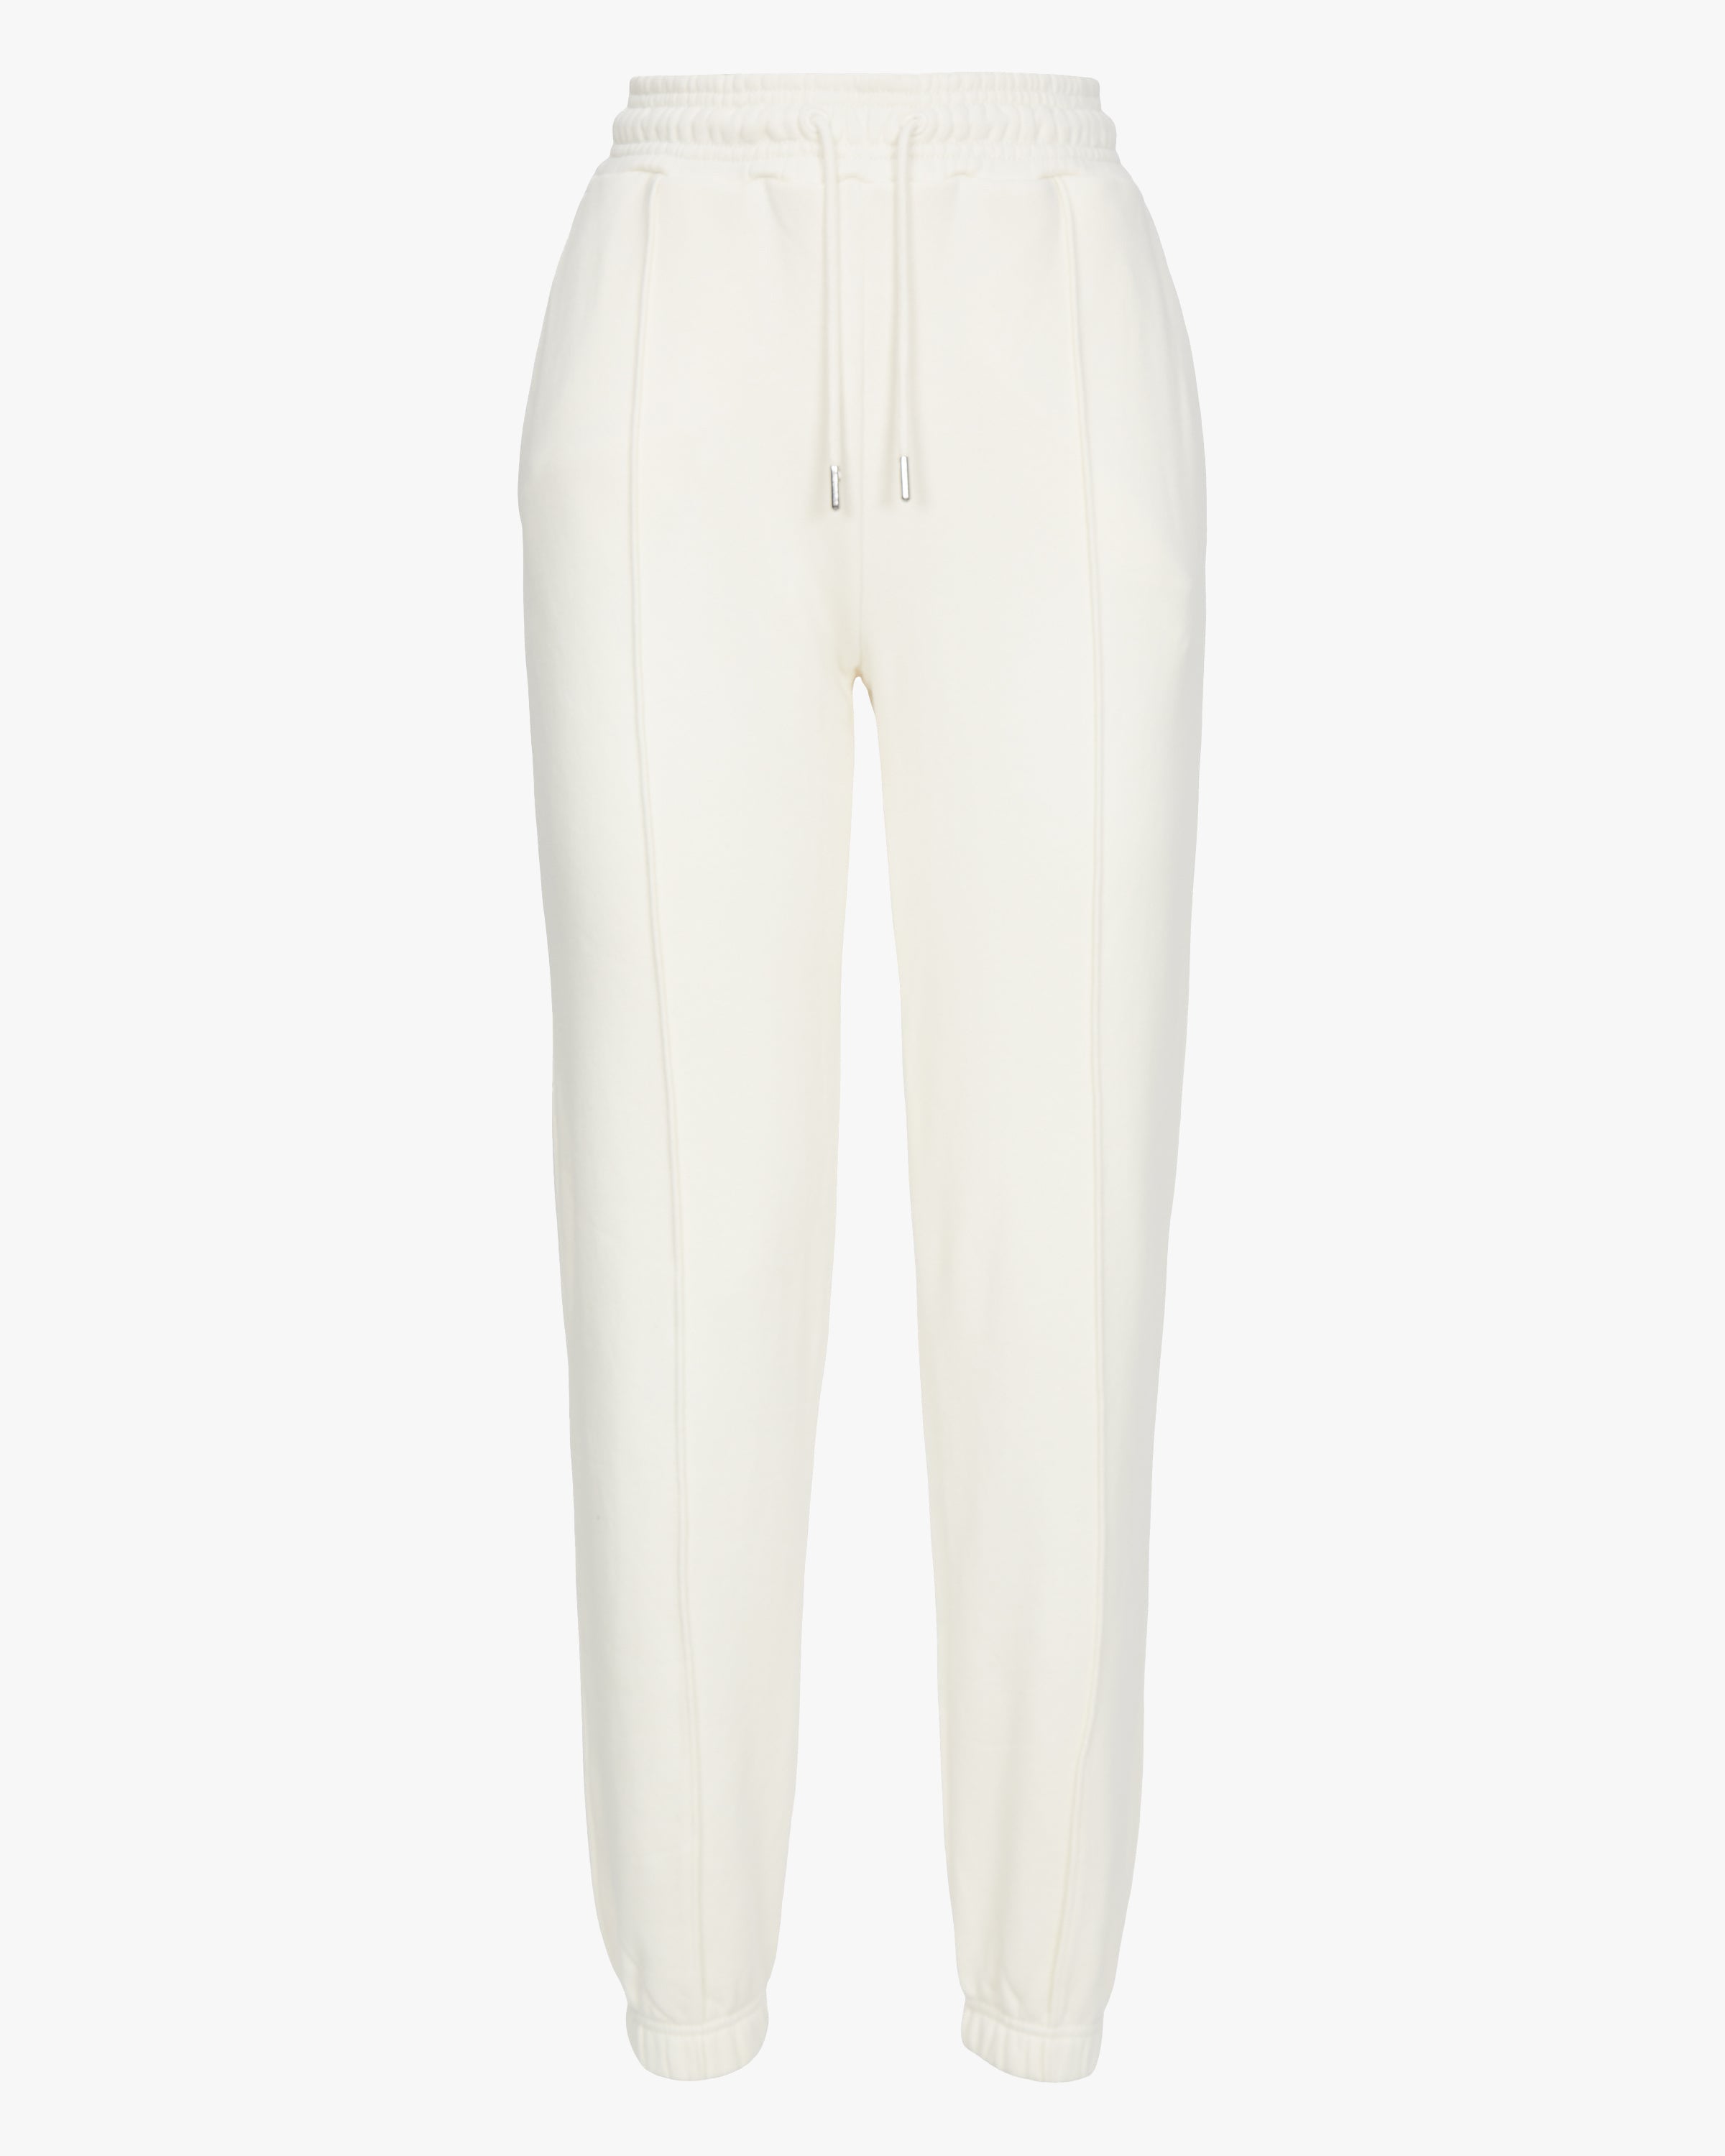 Ninety Percent Peter Sweatpants in Off White